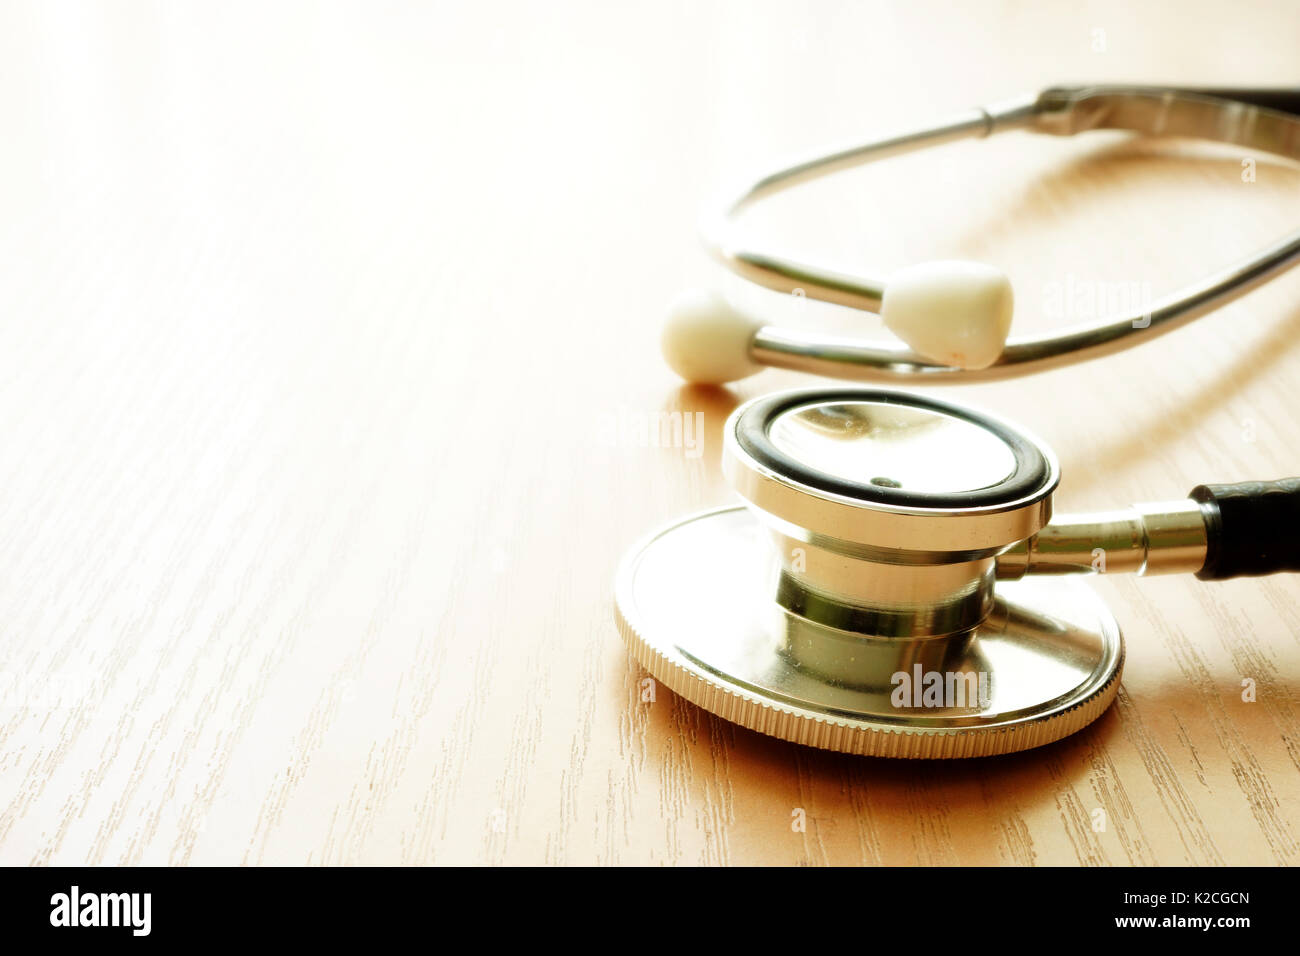 Medicine and health care concept. Stethoscope on a table. Stock Photo